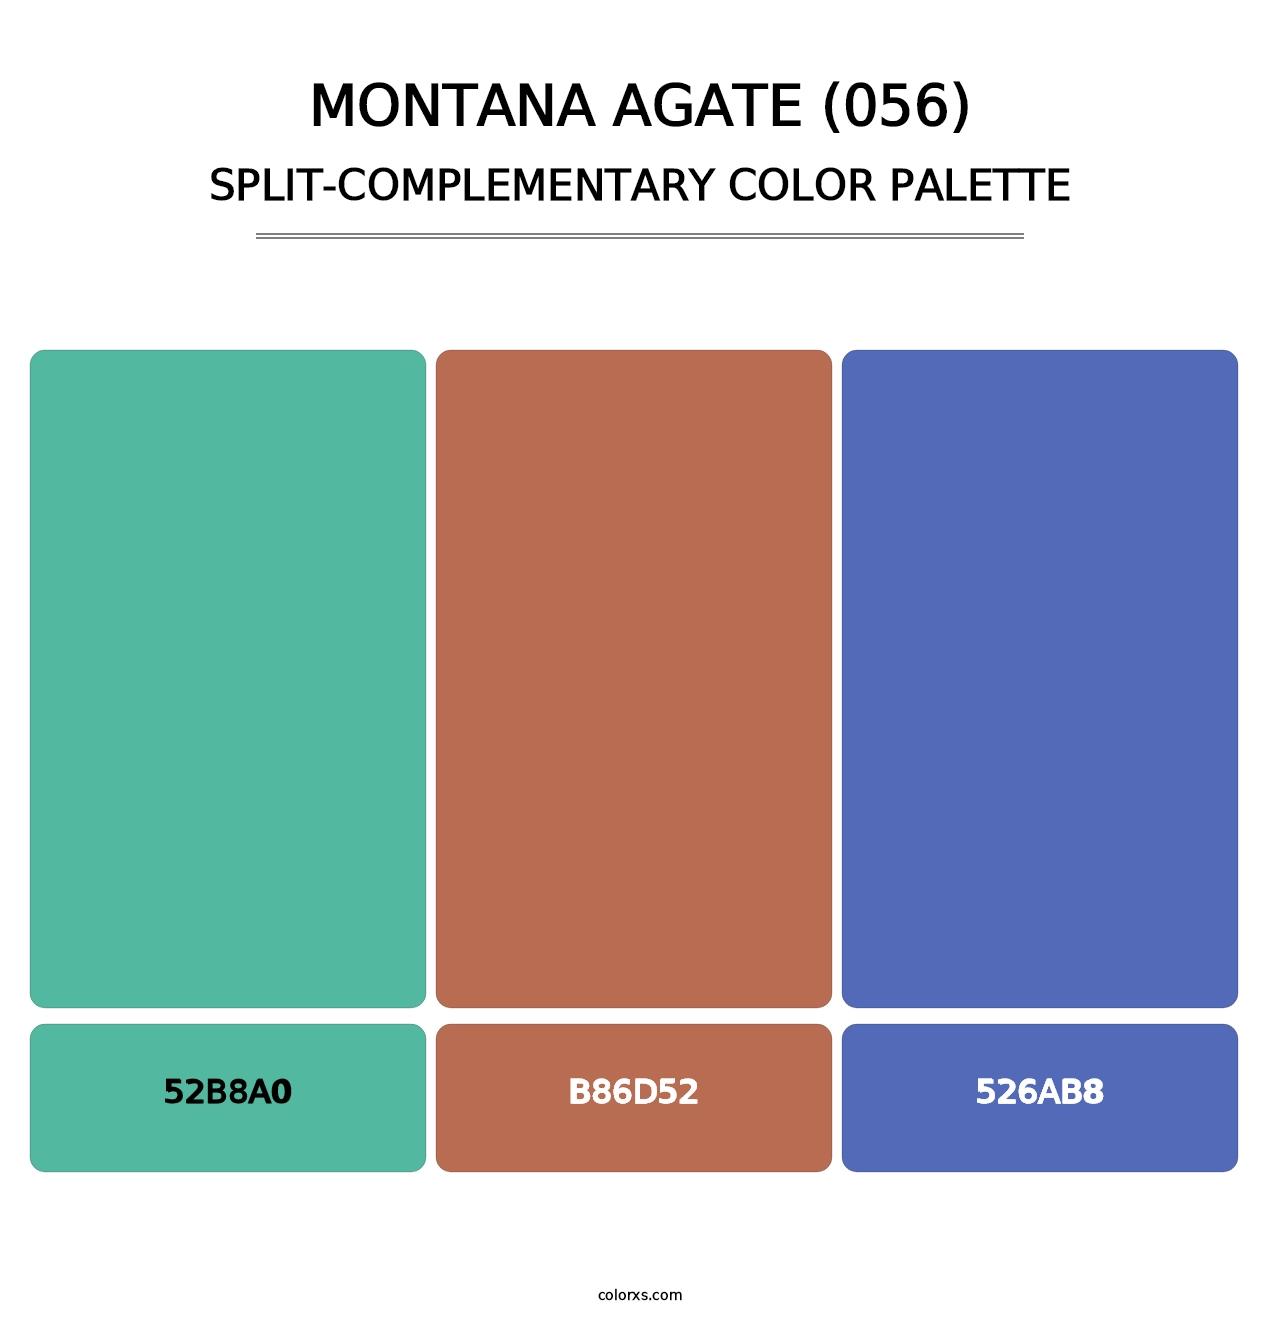 Montana Agate (056) - Split-Complementary Color Palette